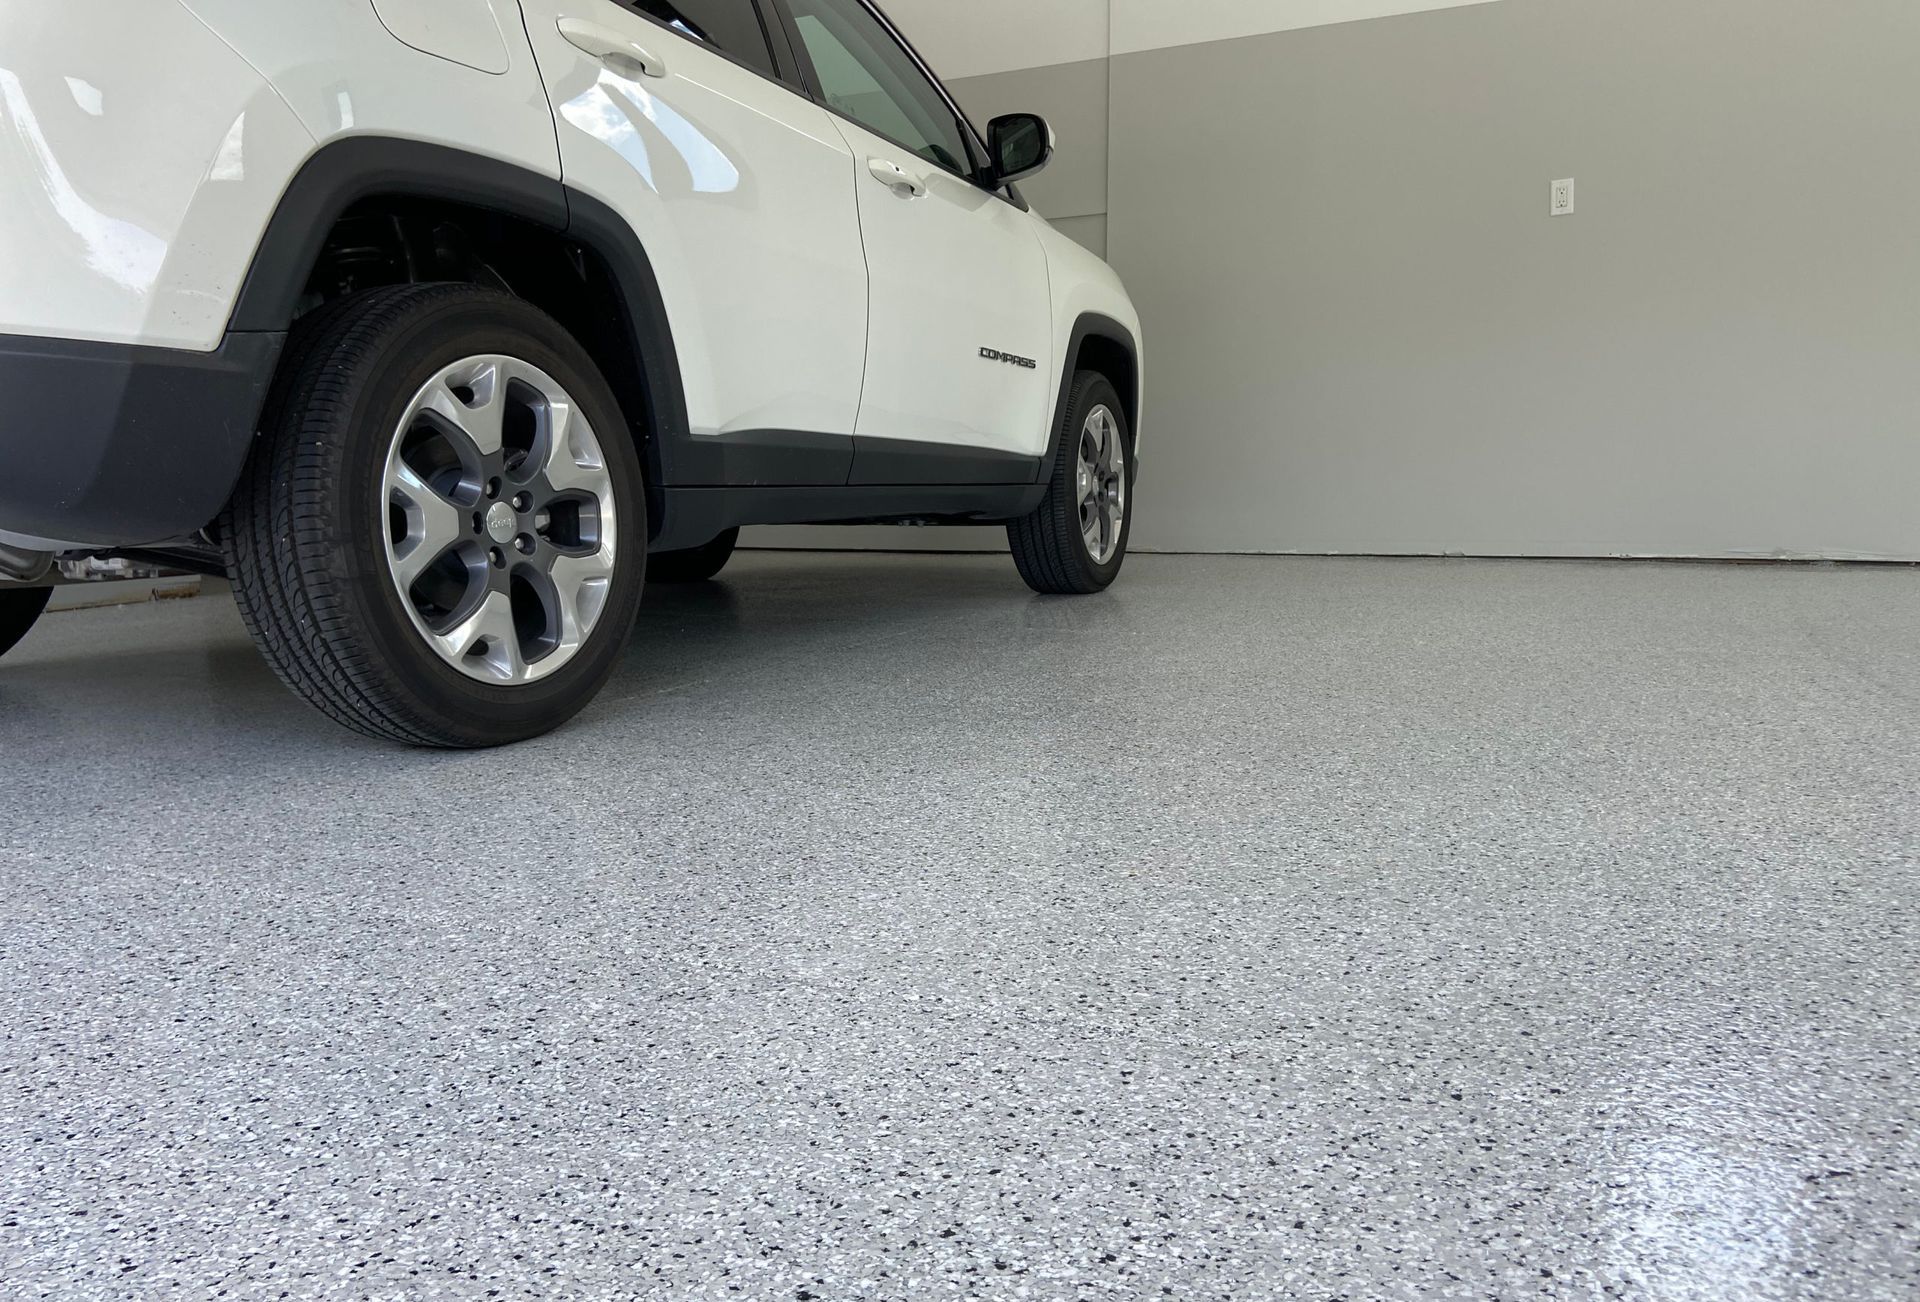 Gleaming blue and grey concrete coating on garage floor beneath the wheel of a parked car.